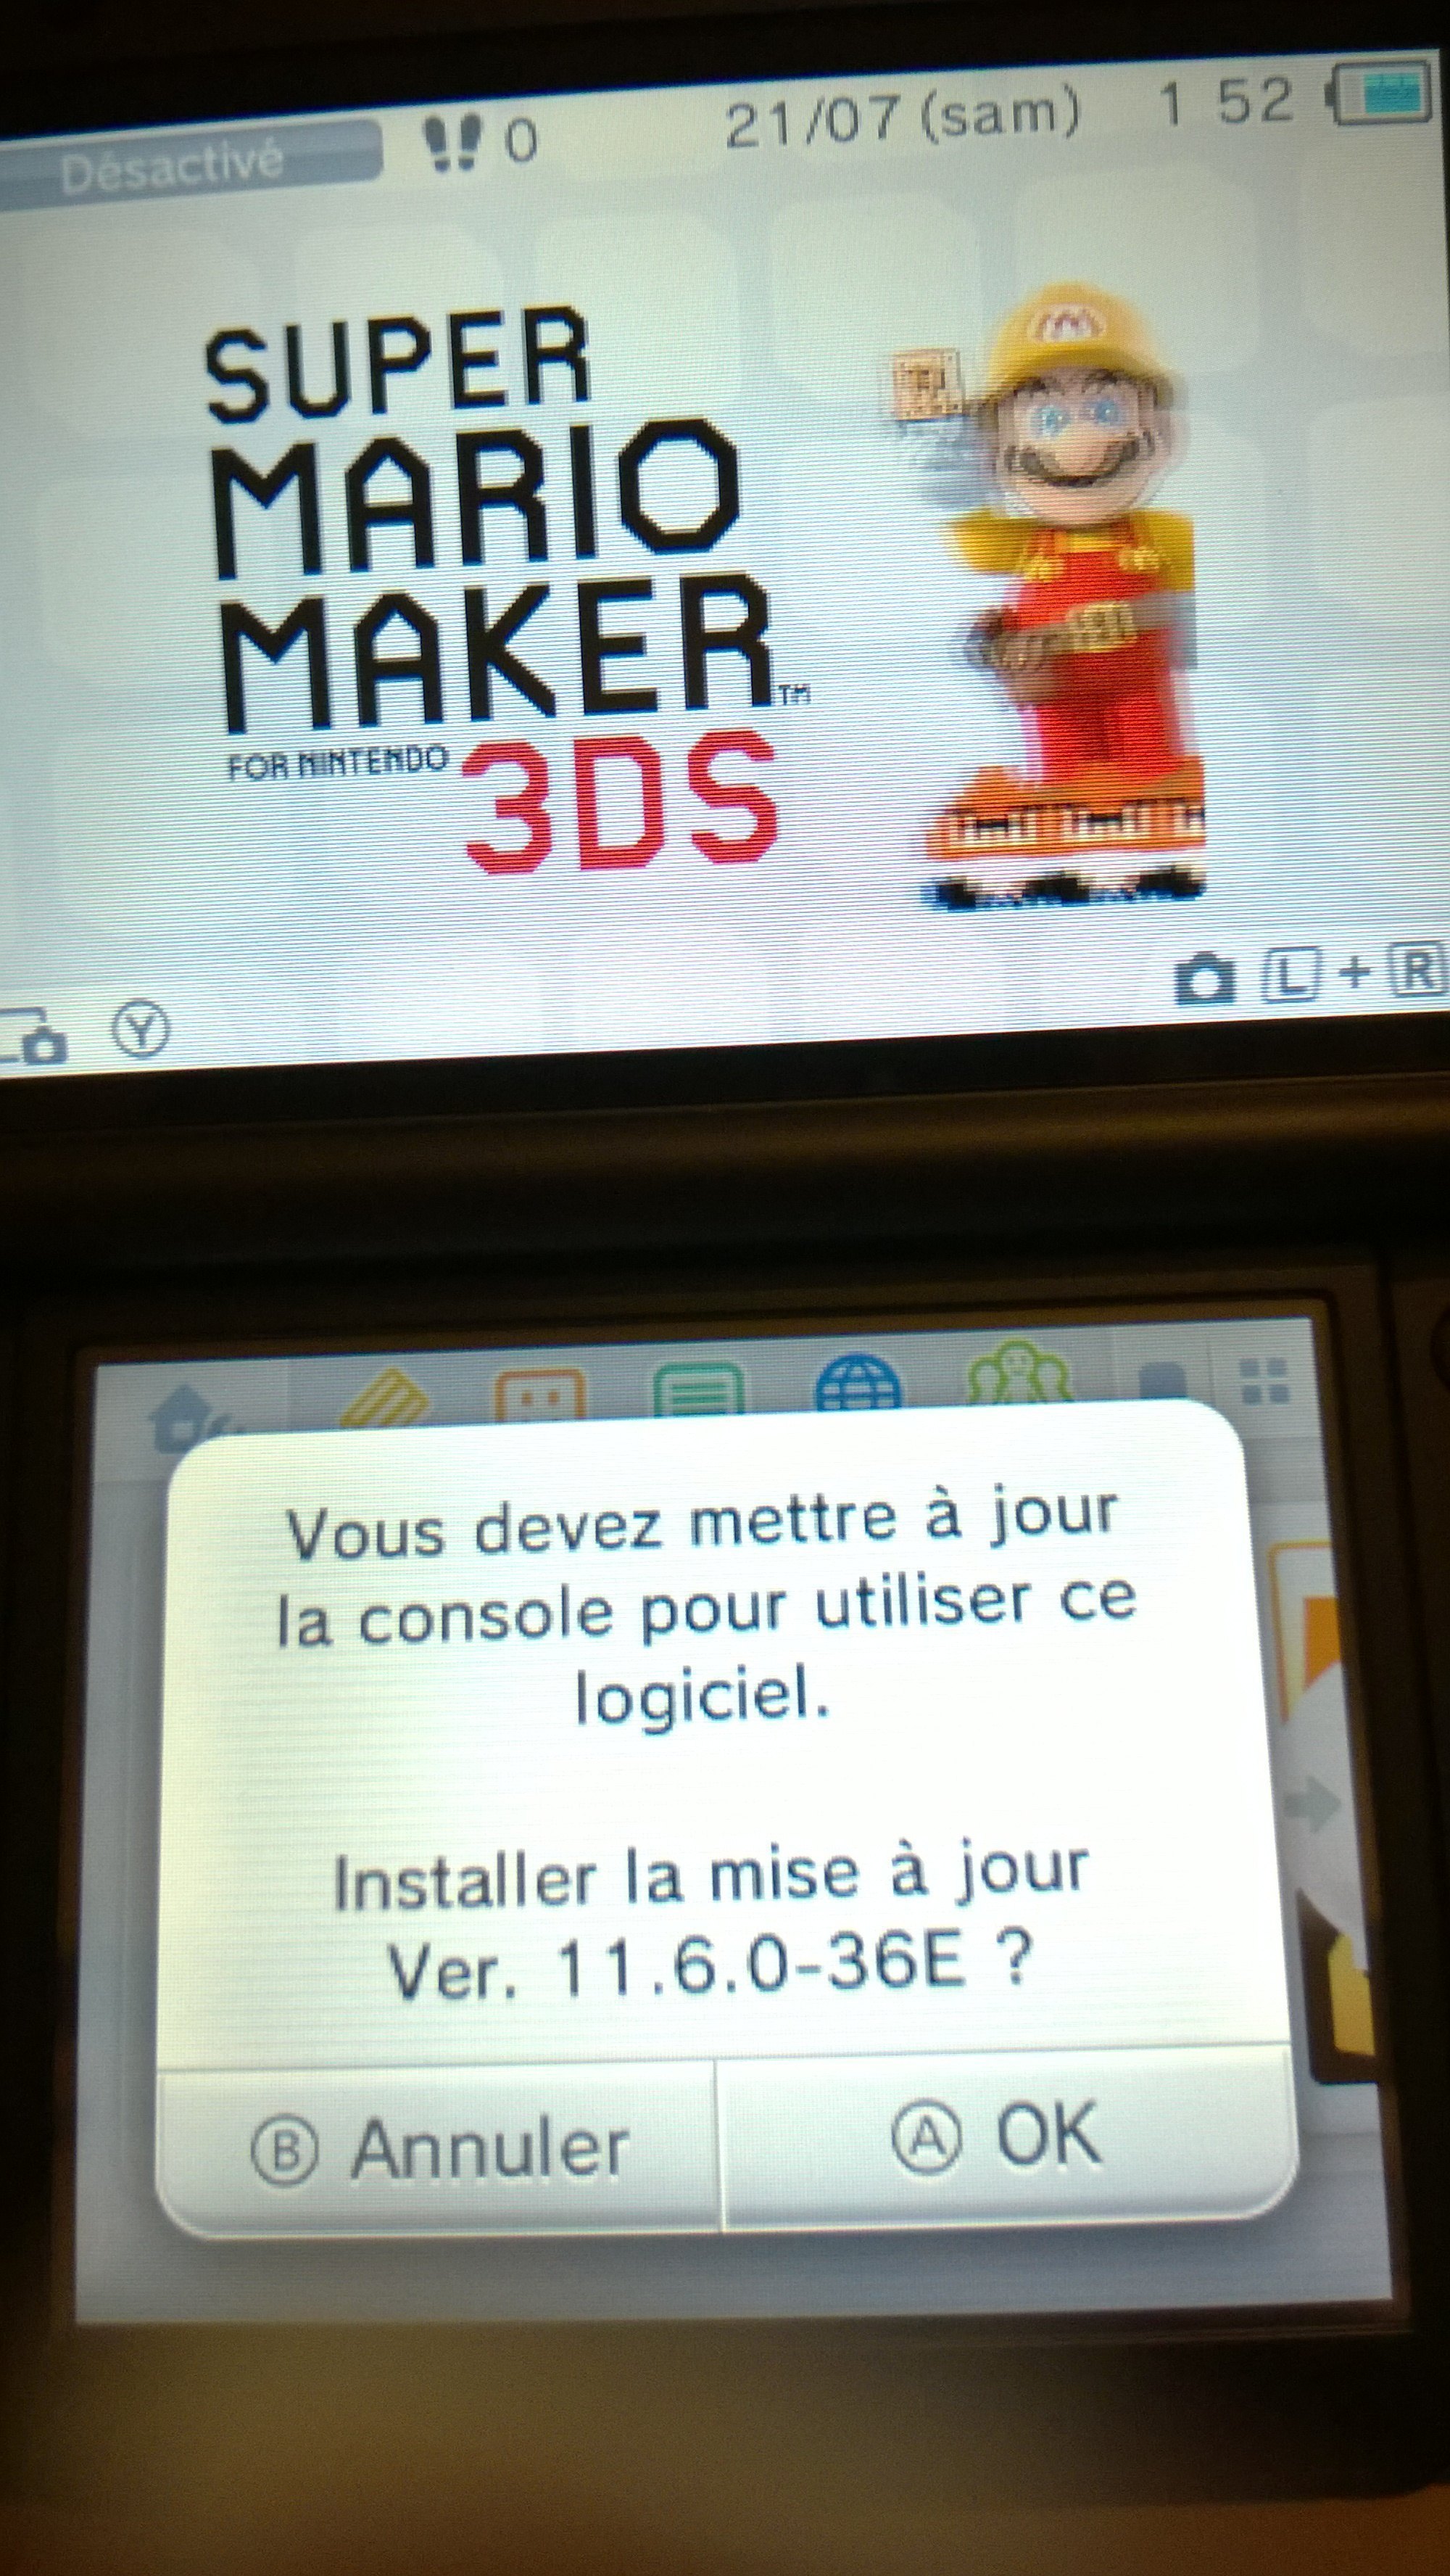 Super Mario Maker 3DS (EU Nintendo Selects version) forcing you to update  to 11.6 | GBAtemp.net - The Independent Video Game Community